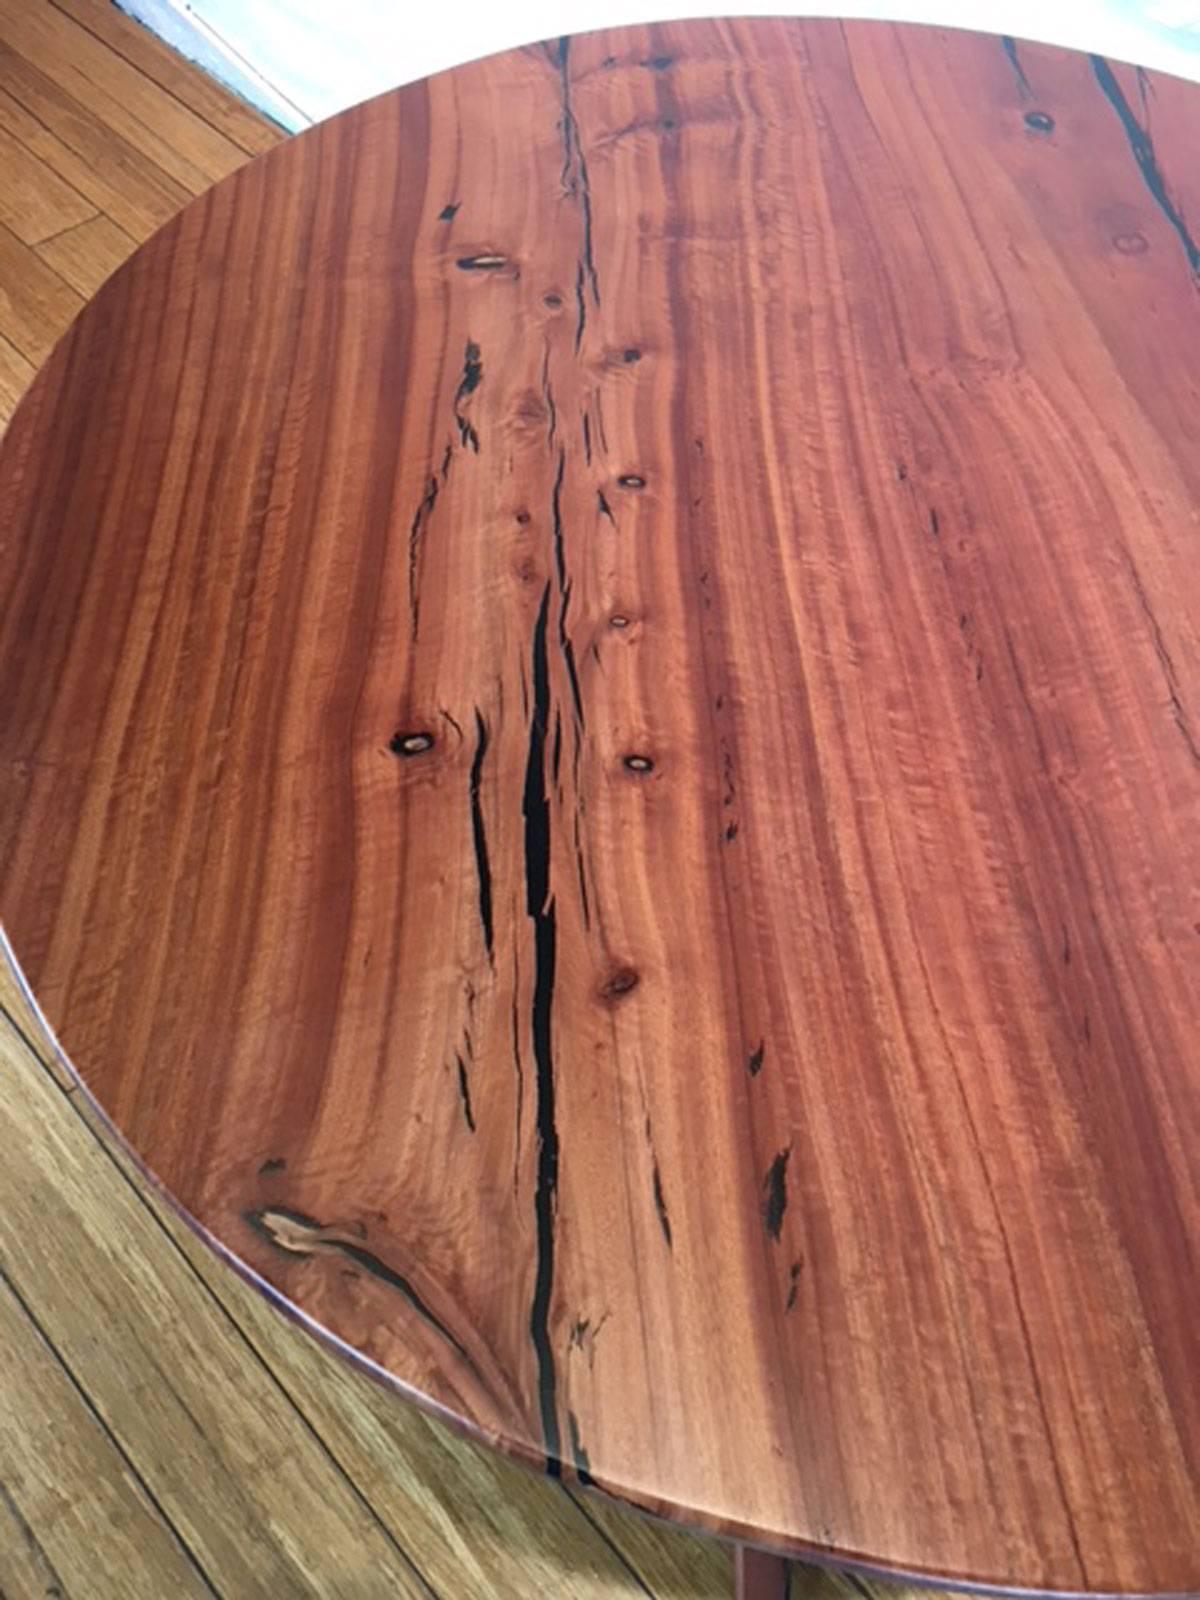 Eye-catching eucalyptus wood centre table designed and produced by master wood artist and designer Scott Mills who only uses reclaimed (deadfall or storm downed trees) in the pieces he produces. This piece is solid eucalyptus wood. No veneer.